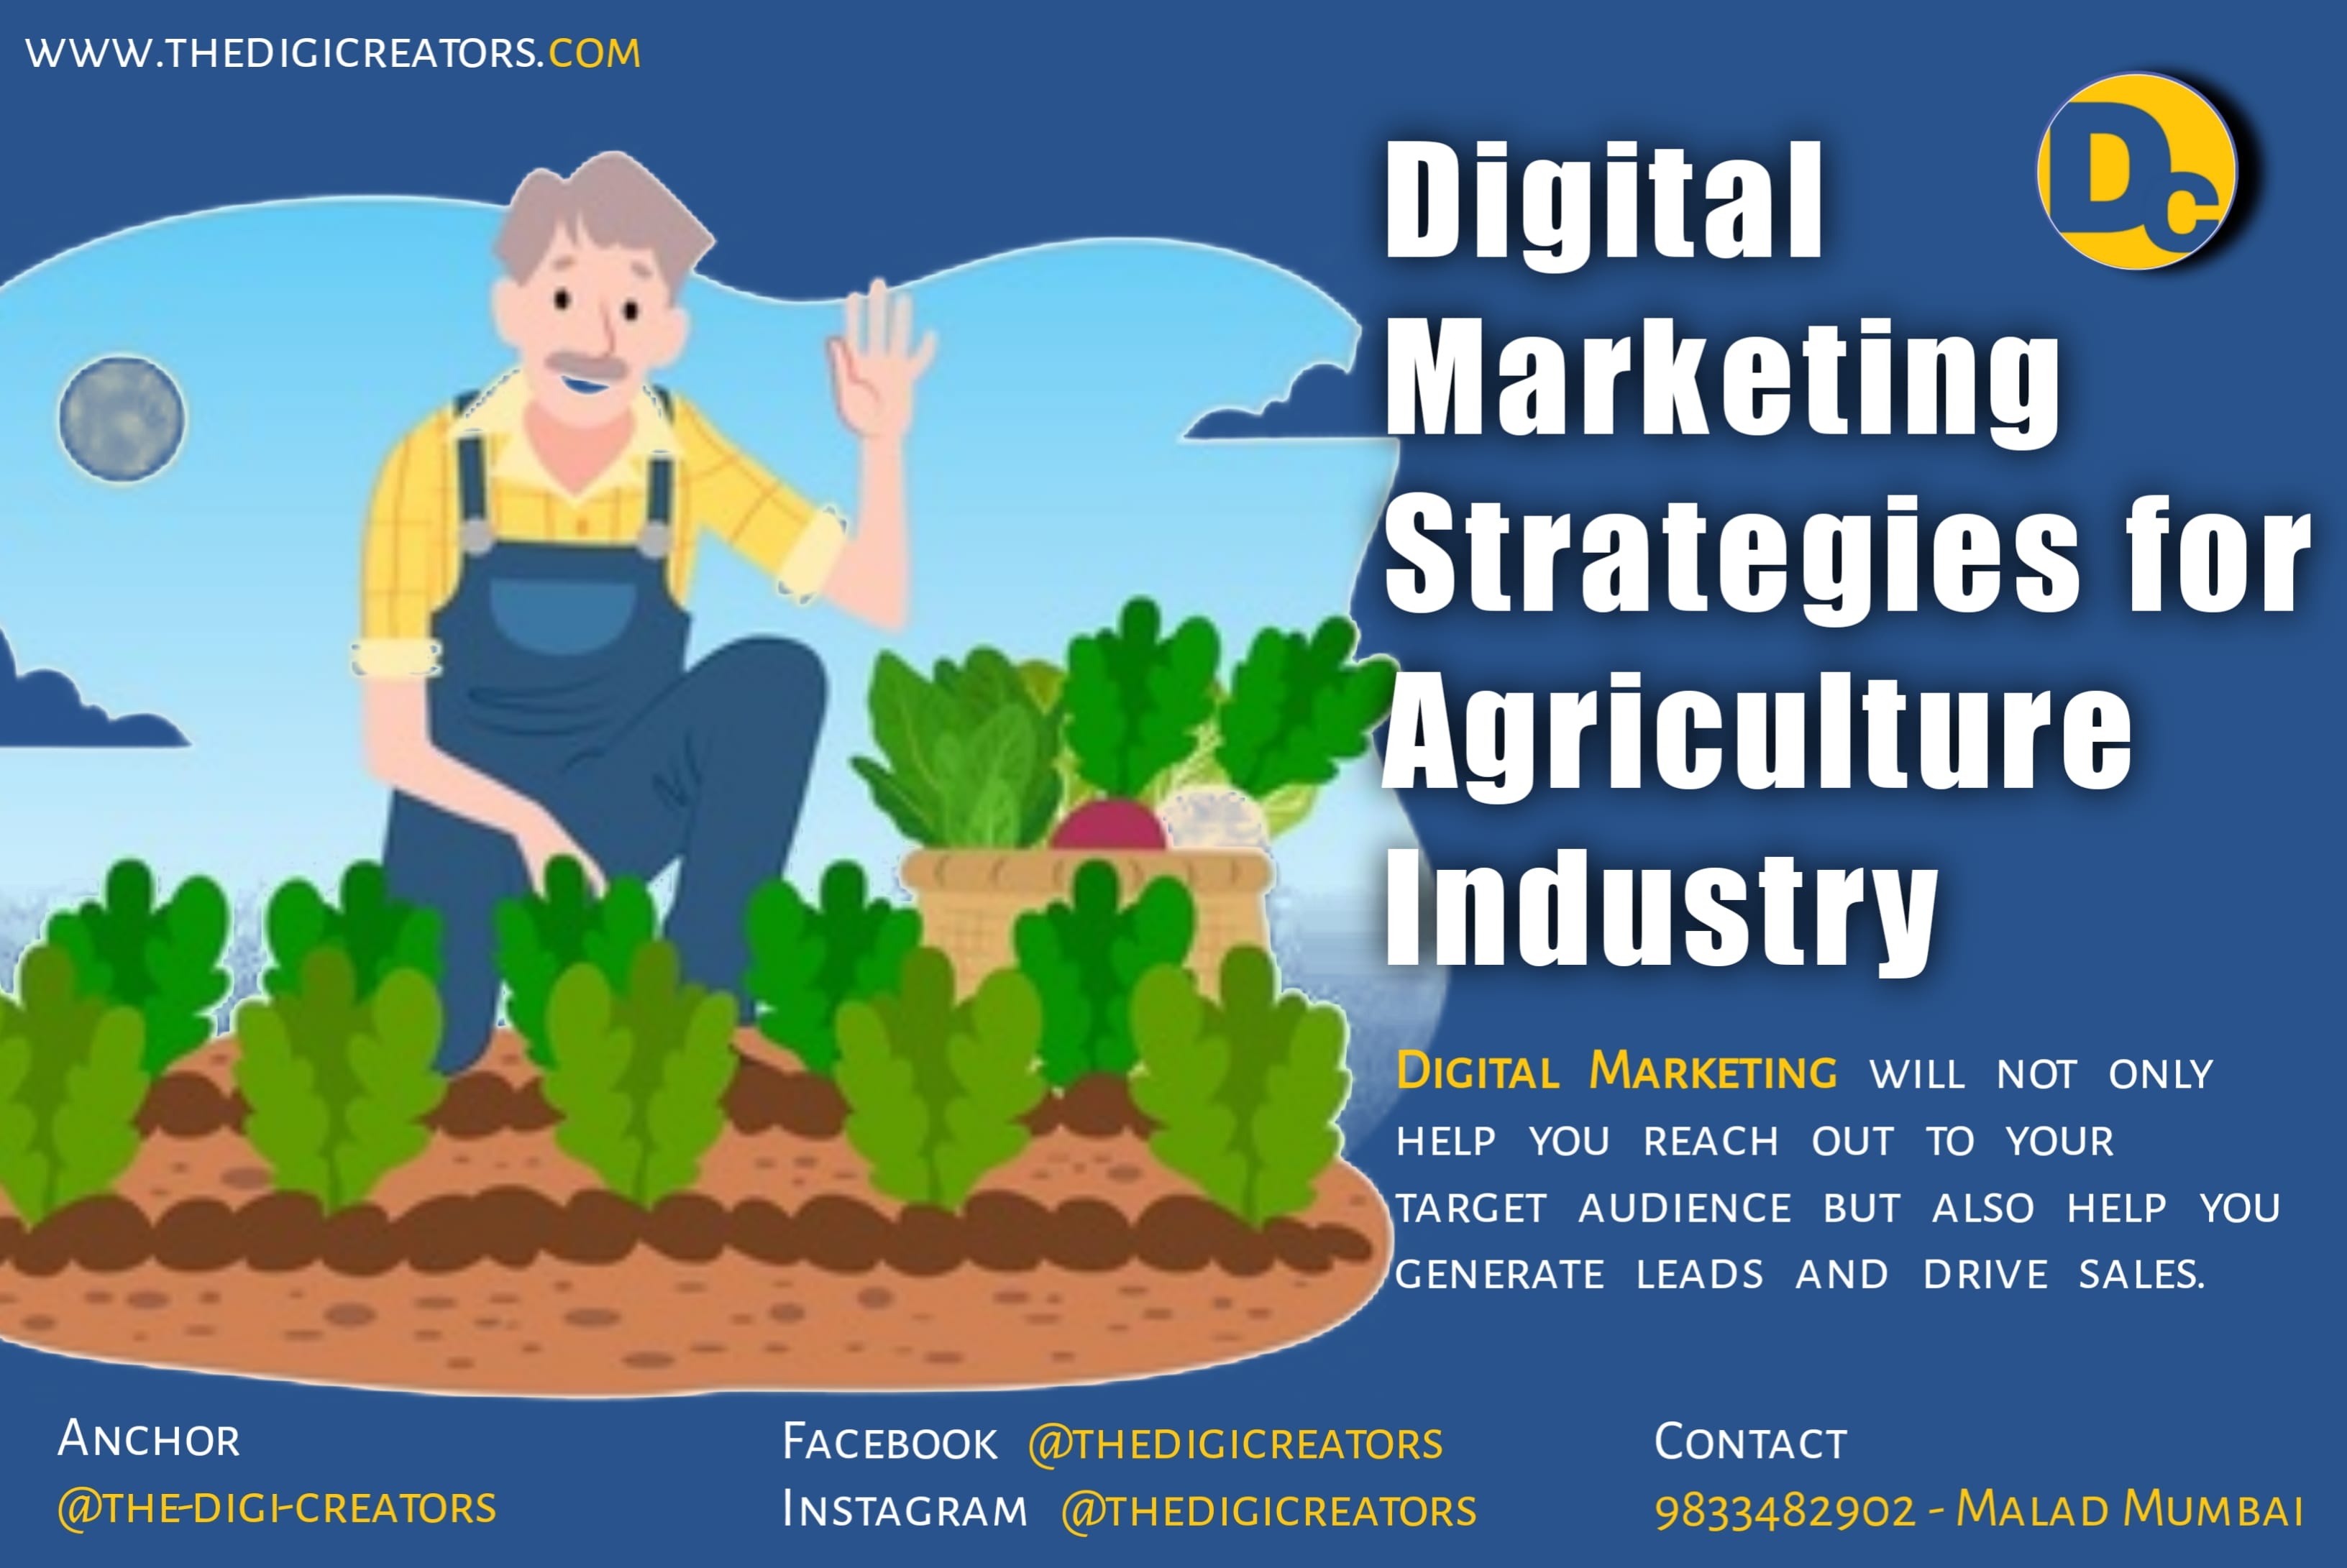 Digital Marketing strategies for Agriculture Industry